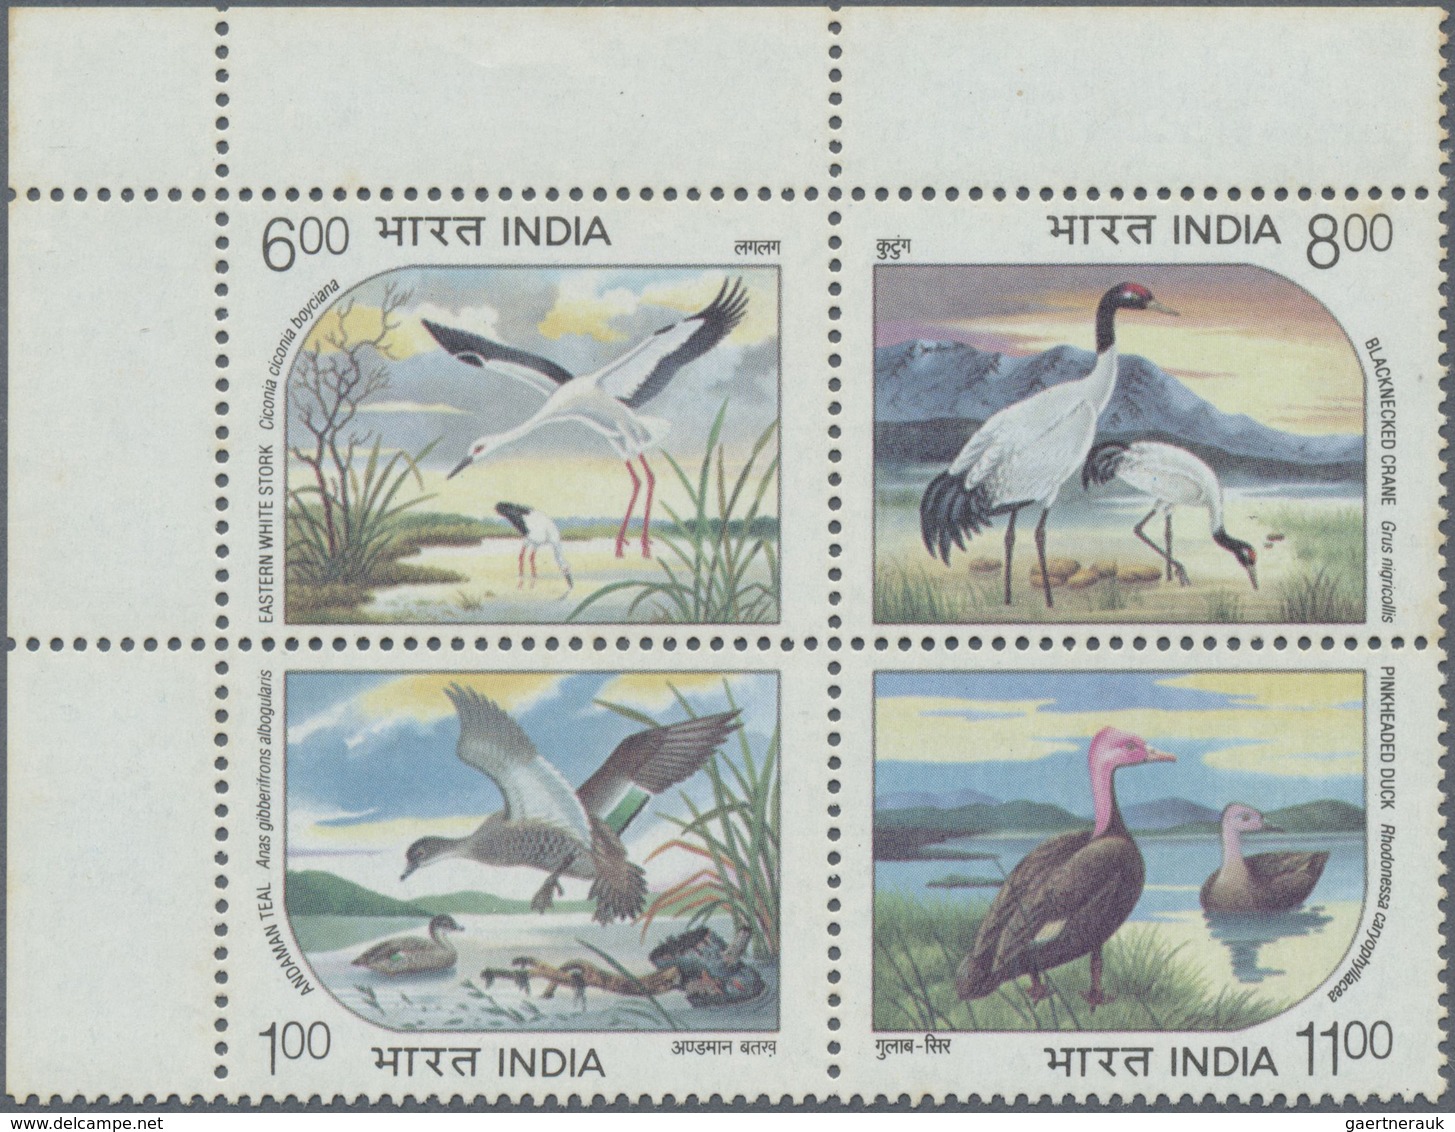 ** Indien: 1947-2000's ca.: Comprehensive stock of single stamps, complete sets, blocks of four, other